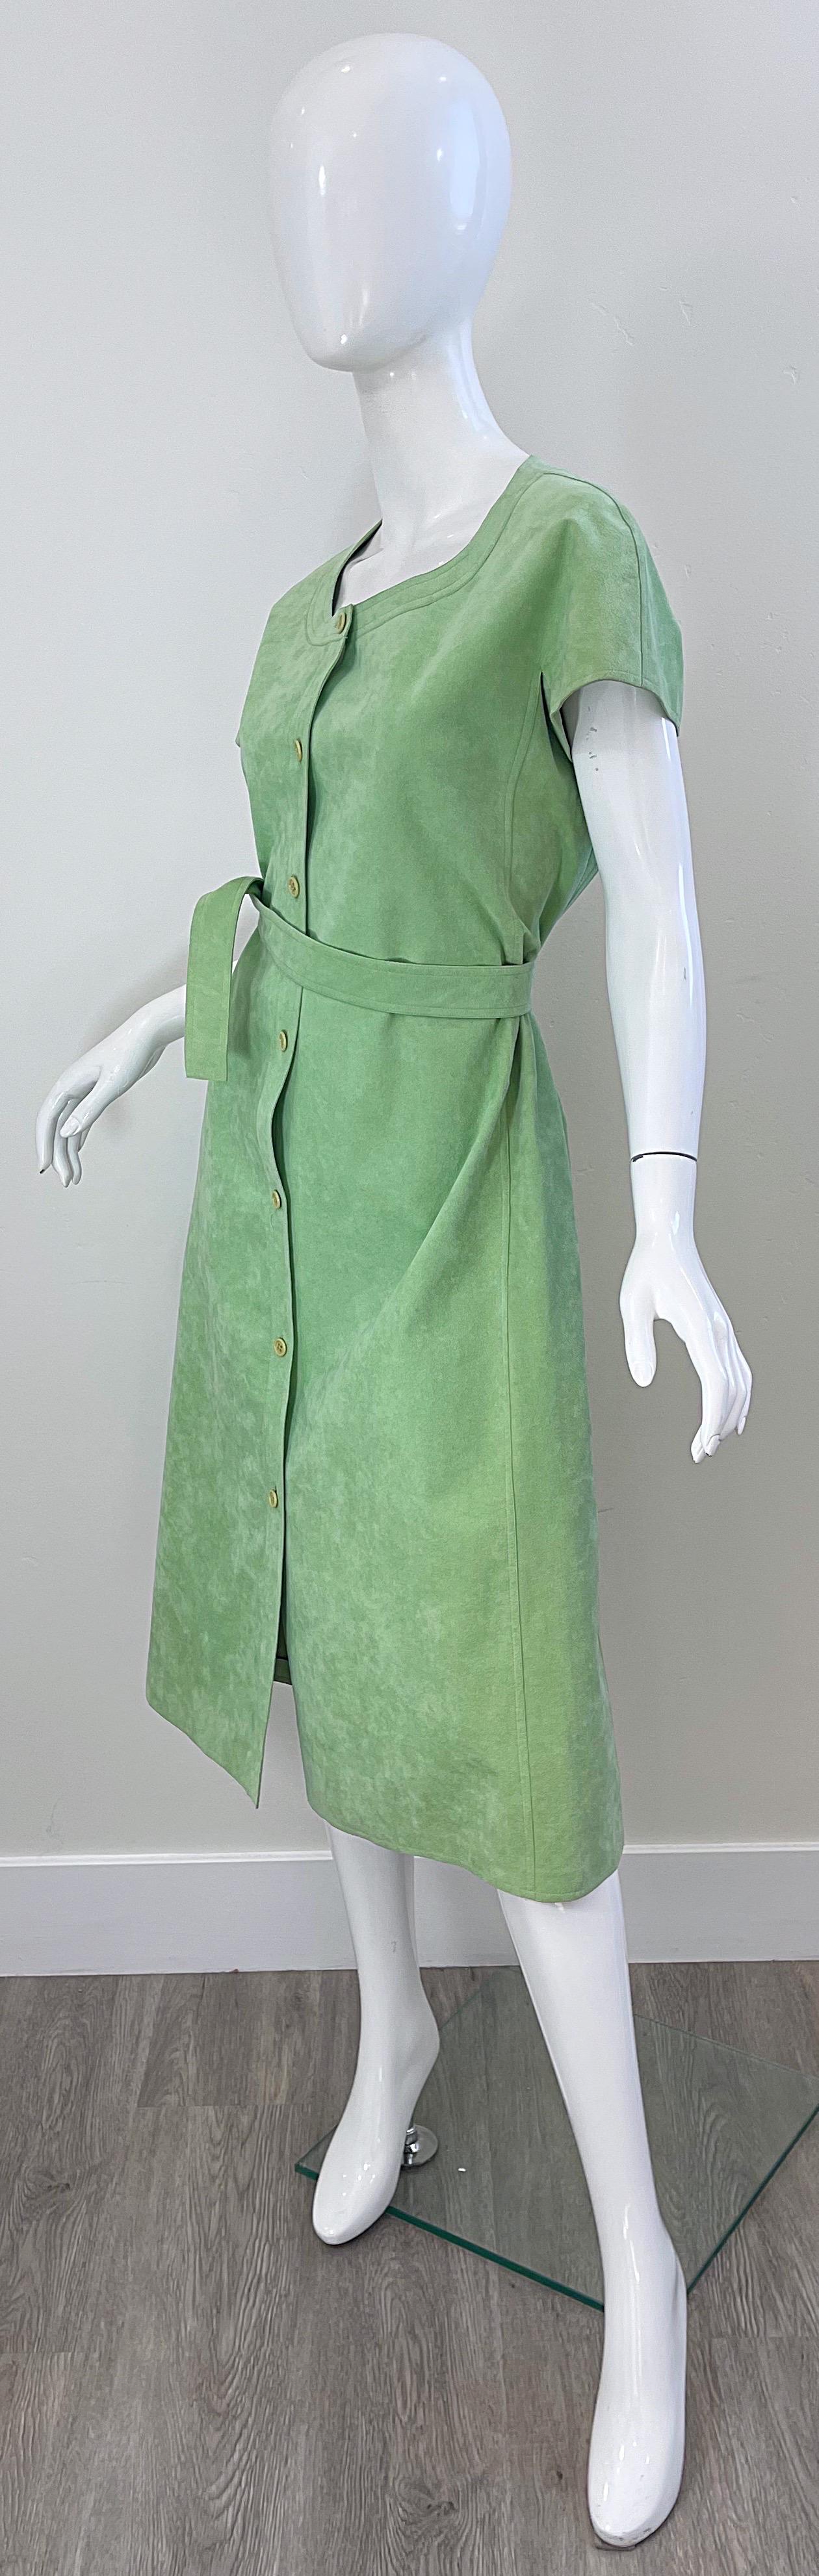 Halston 1970s Pistachio Green Ultra Suede Short Sleeve Vintage 70s Shirt Dress In Excellent Condition For Sale In San Diego, CA